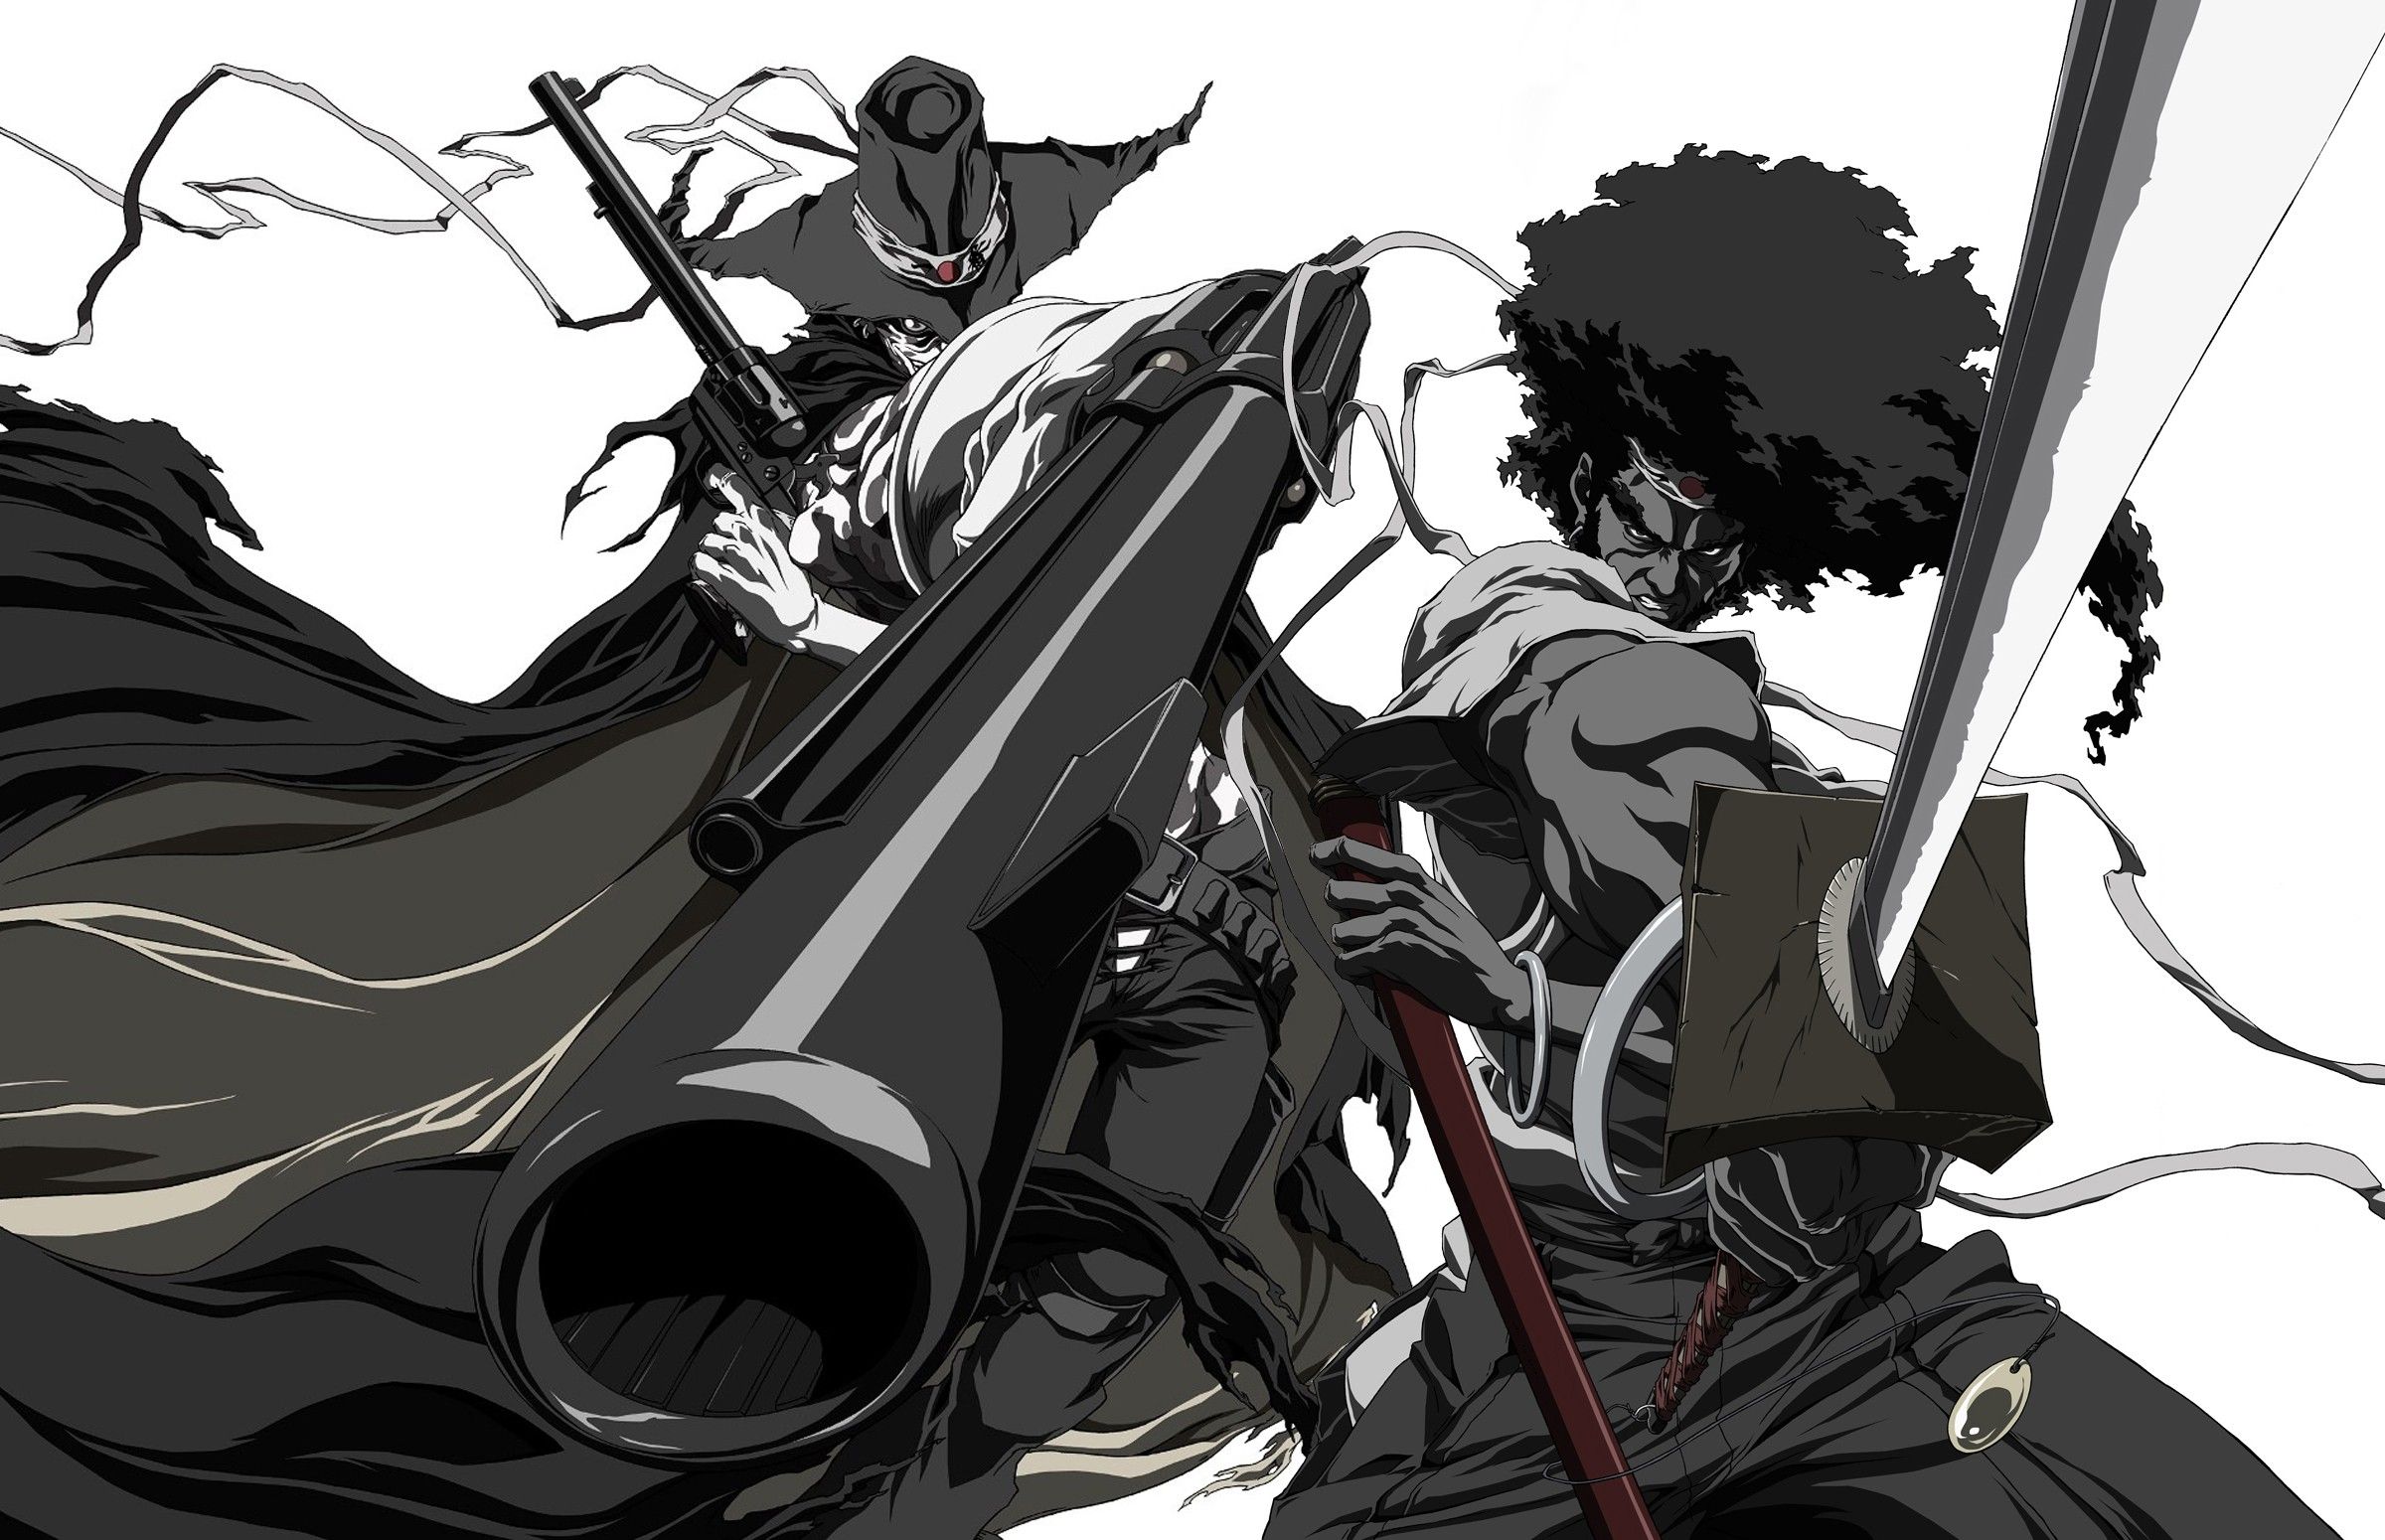 Afro Samurai Picture Wallpapers